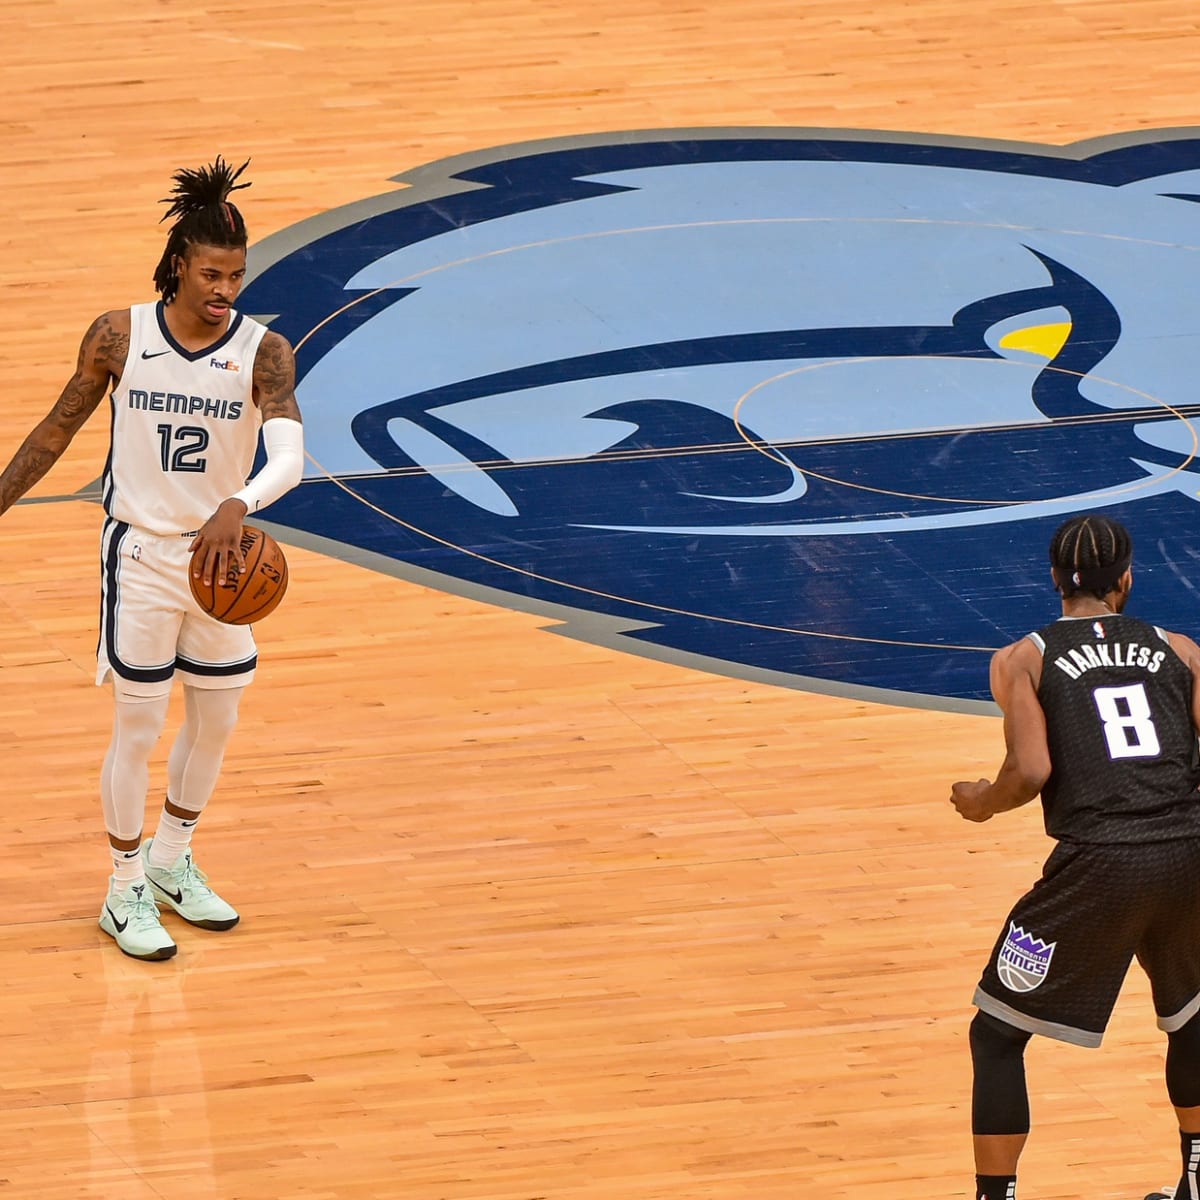 Ja Morant breaks in the Grizzlies' throwback uniforms with 26 vs